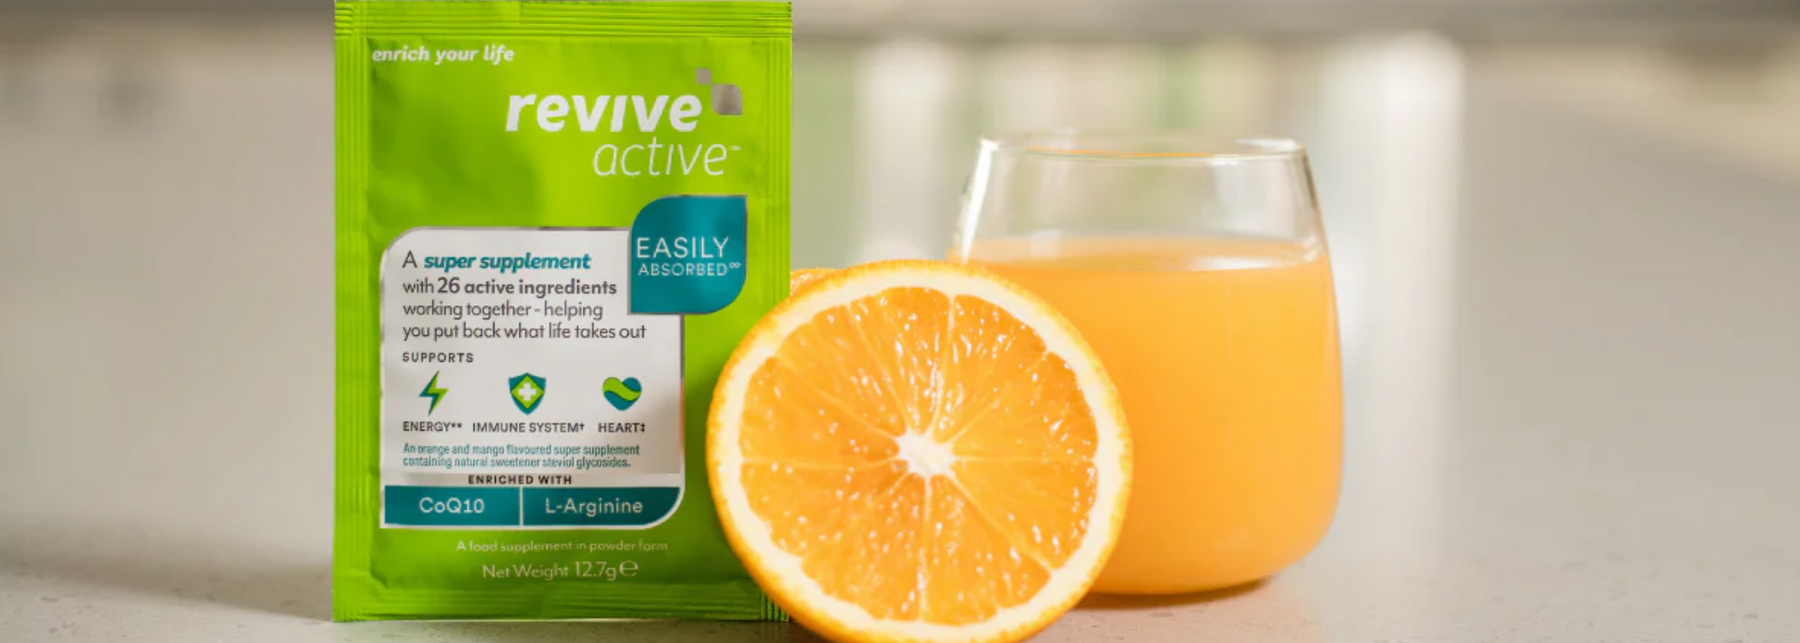 Revive Active - The importance of CoQ10 for energy & heart health